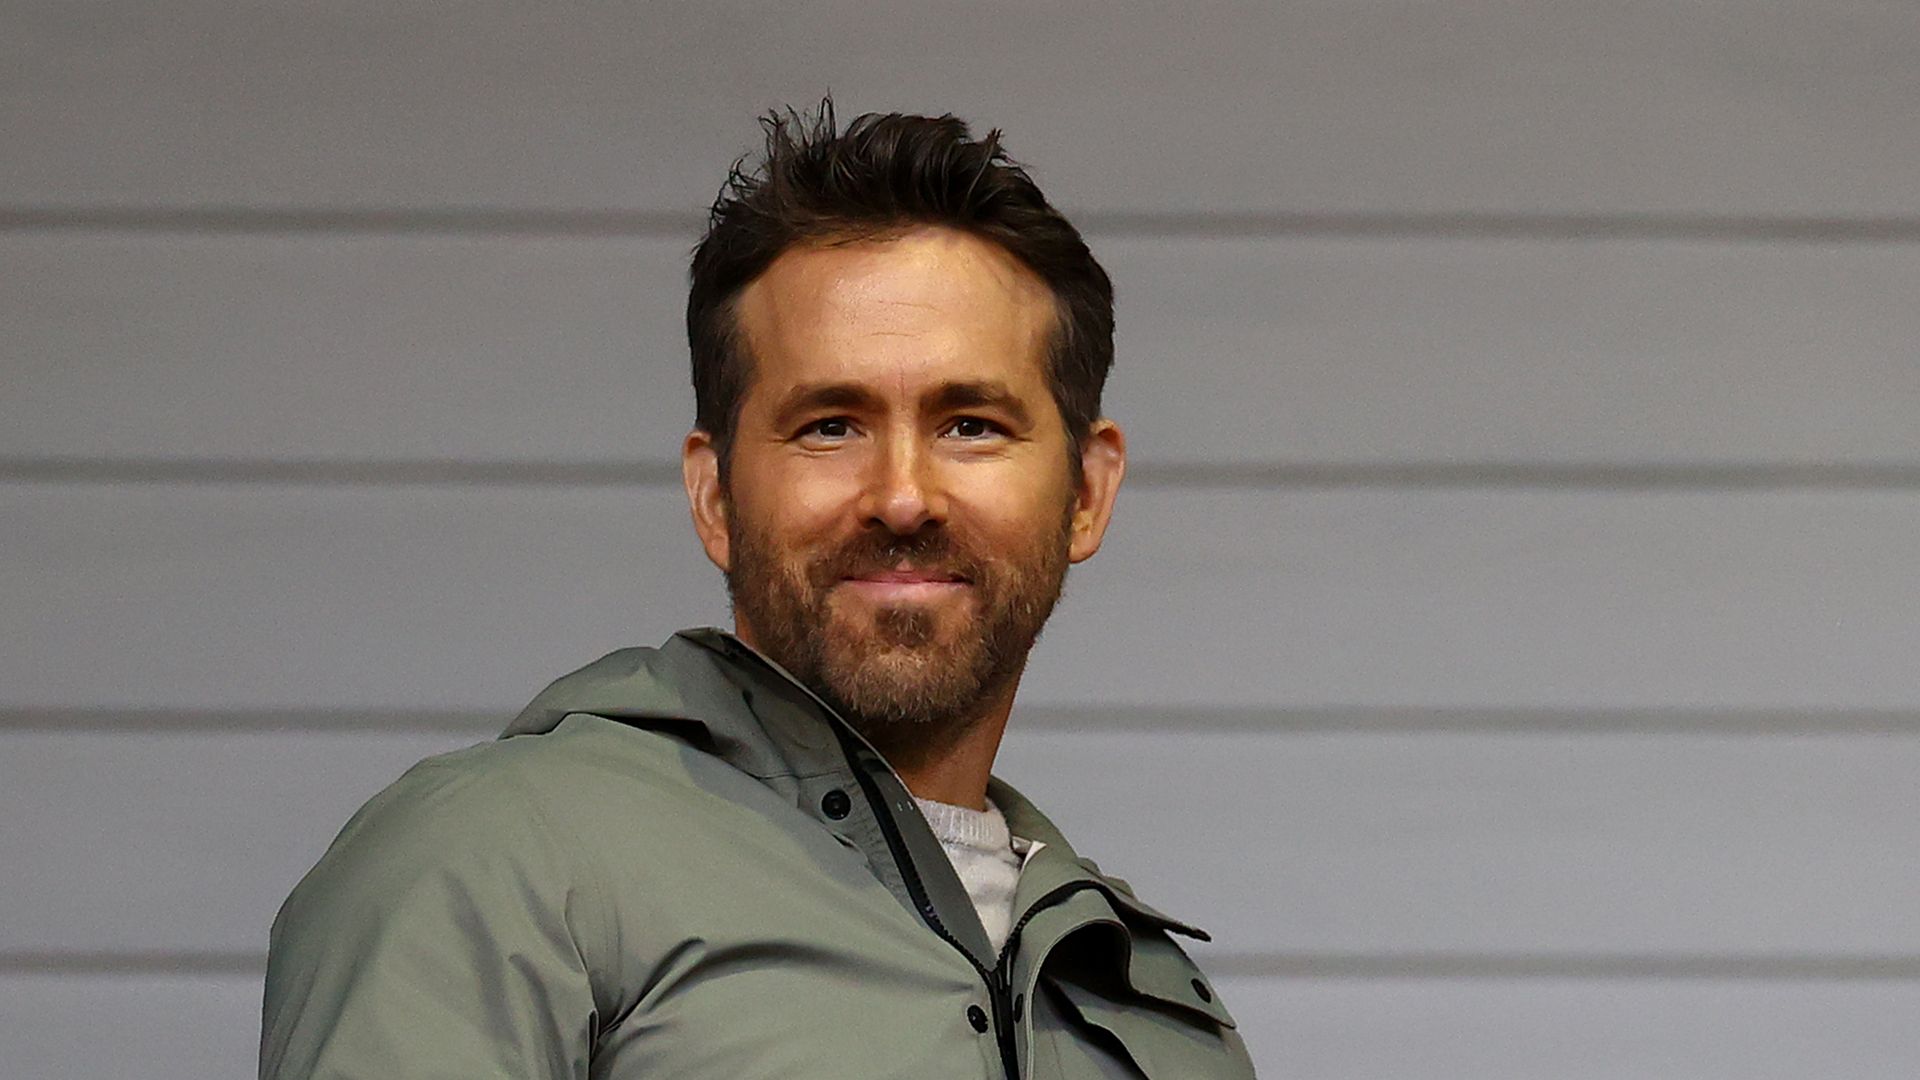 Ryan Reynolds, Co-Owner of Wrexham looks on during the Emirates FA Cup Fourth Round match between Wrexham and Sheffield United at Racecourse Ground on January 29, 2023 in Wrexham, Wales